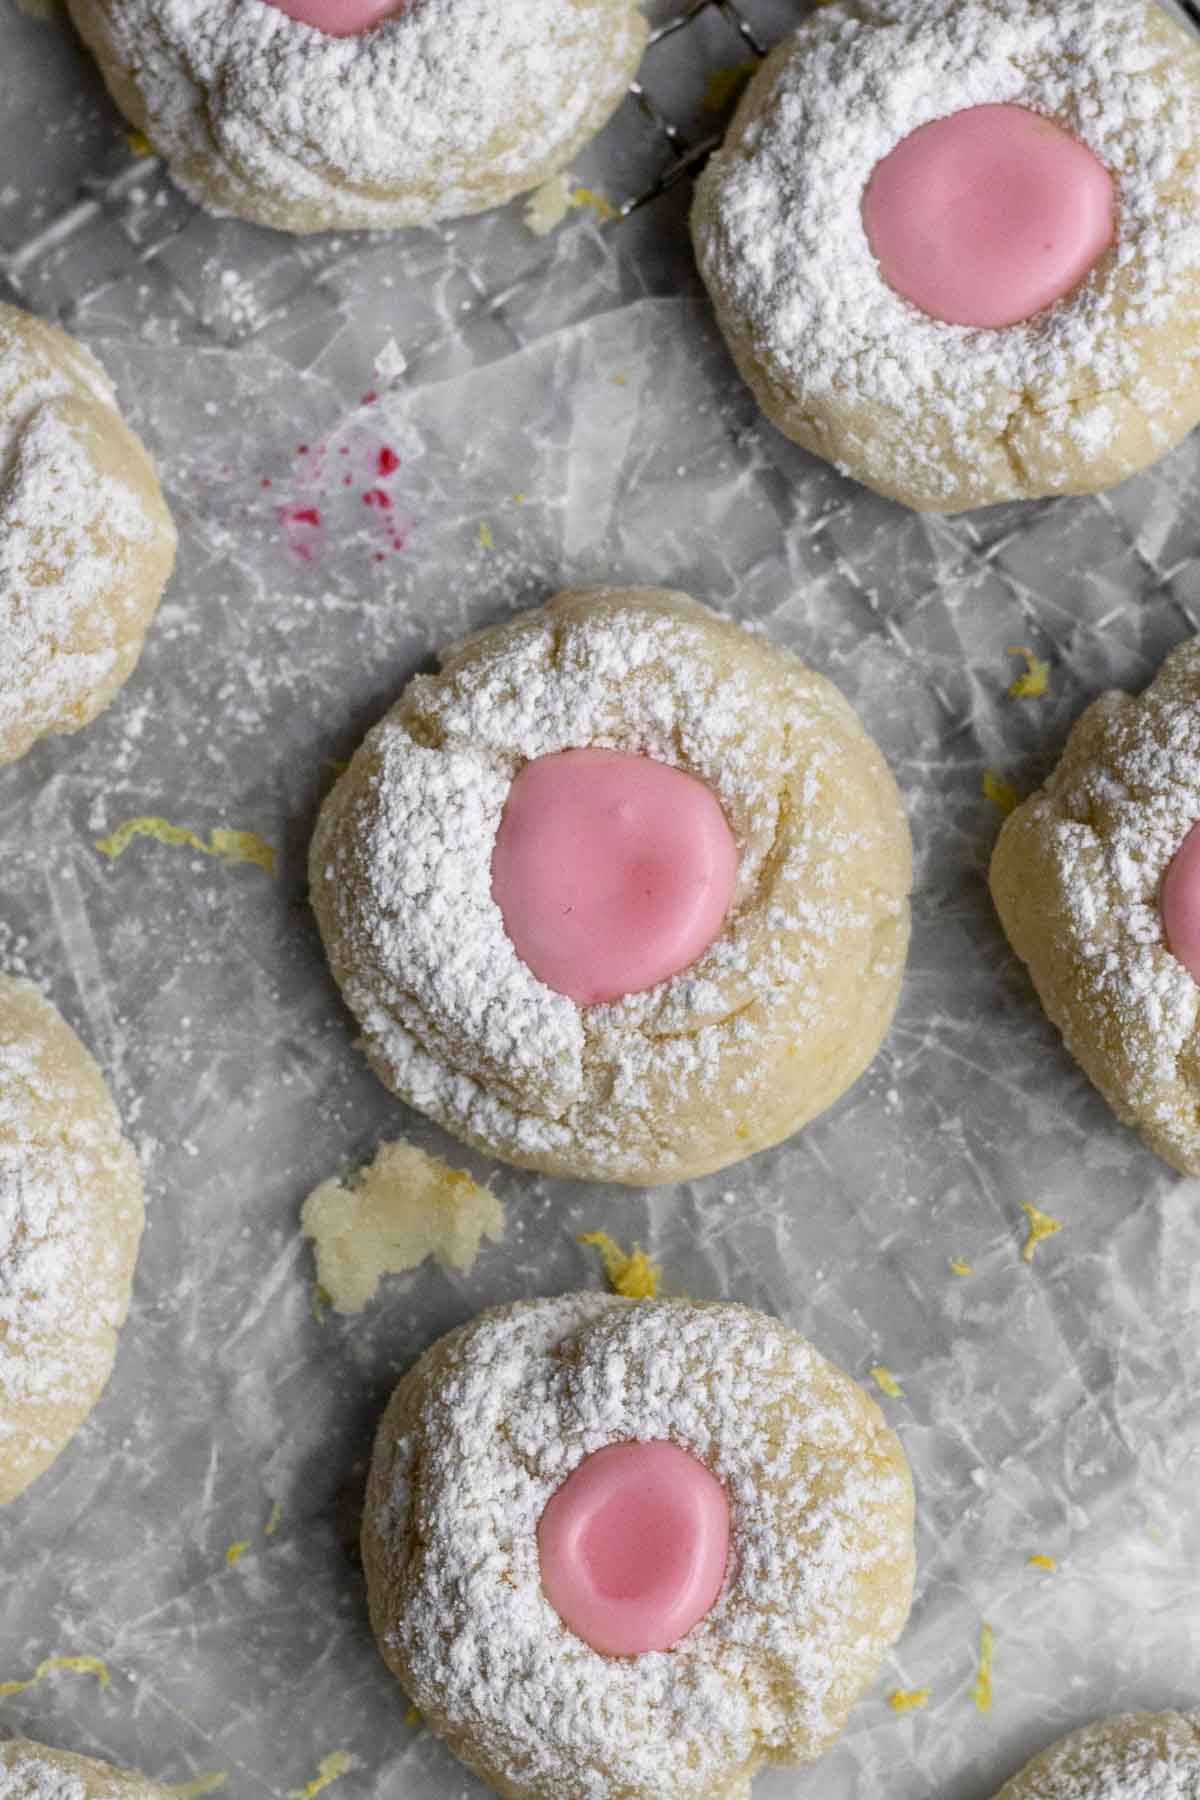 A closer look at the pink raspberry icing center of the cookie.